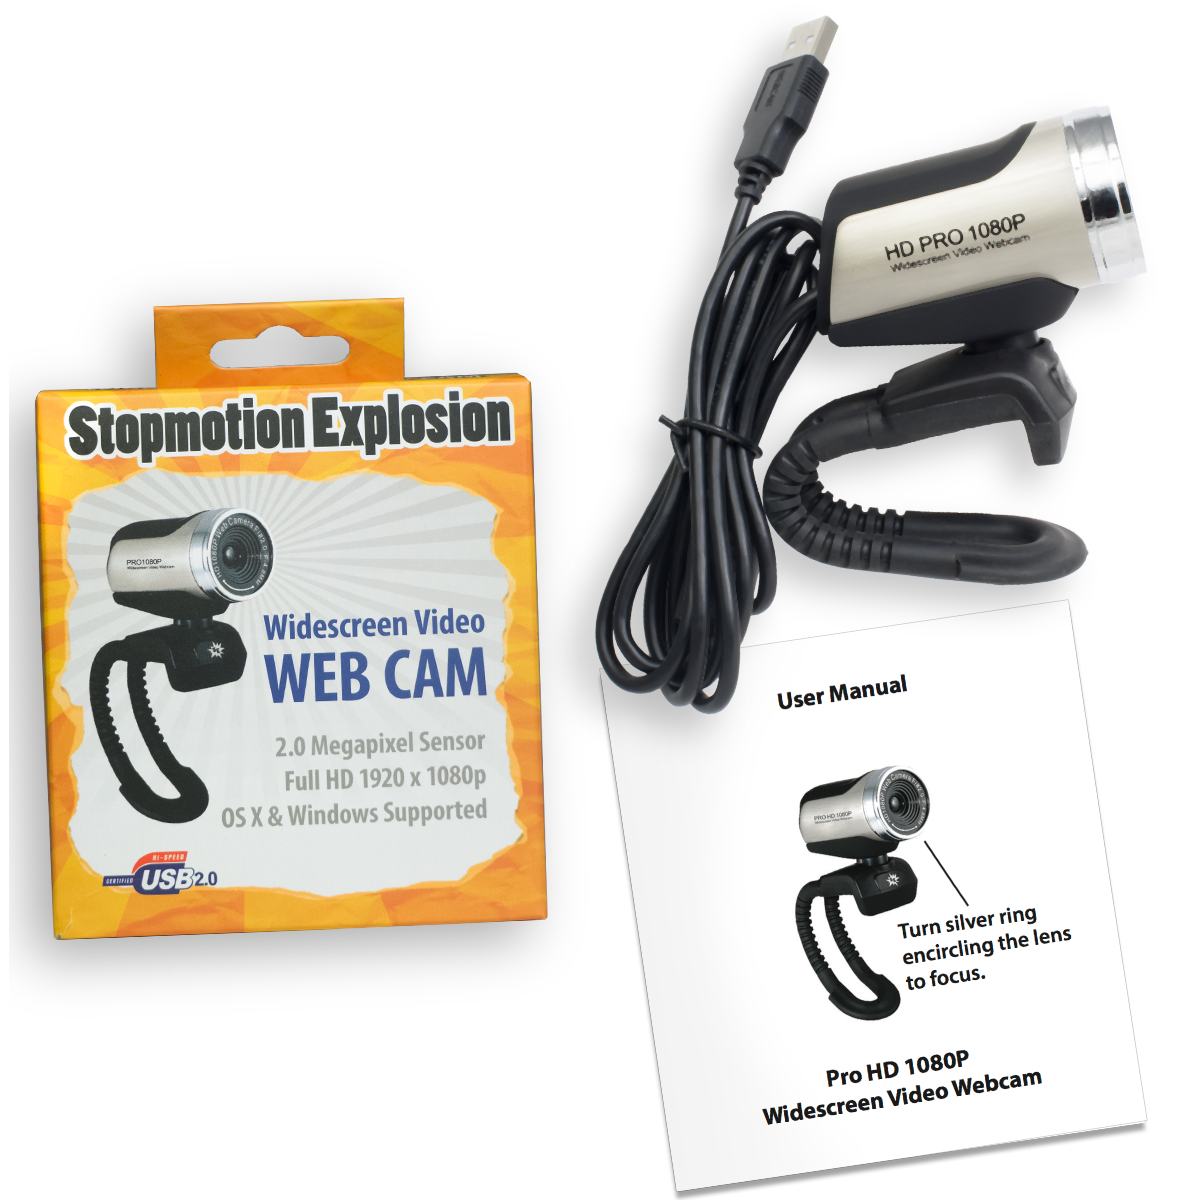 My Review of the Stop Motion Animation Kit from Stopmotion Explosion